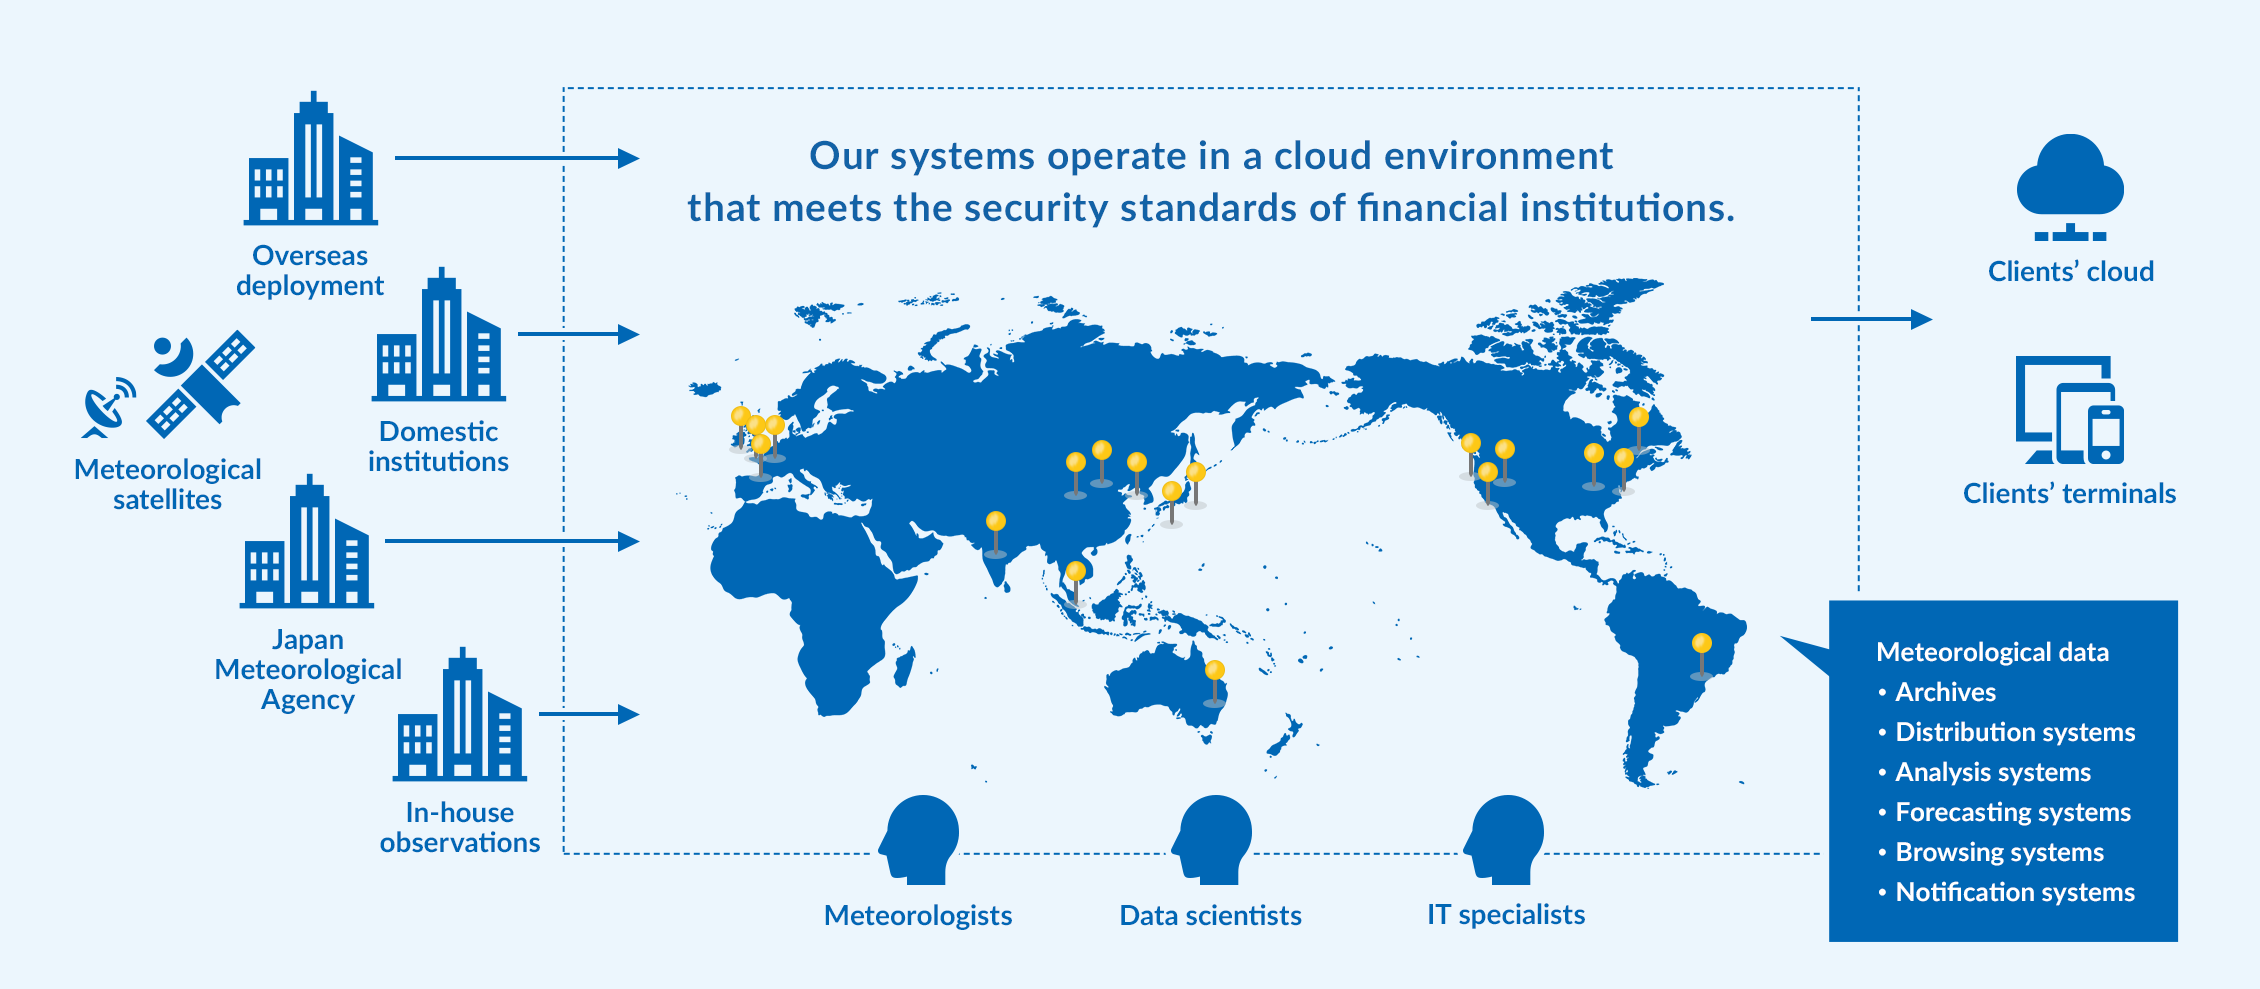 Our systems operate in a cloud environment that meets the security standards of financial institutions.